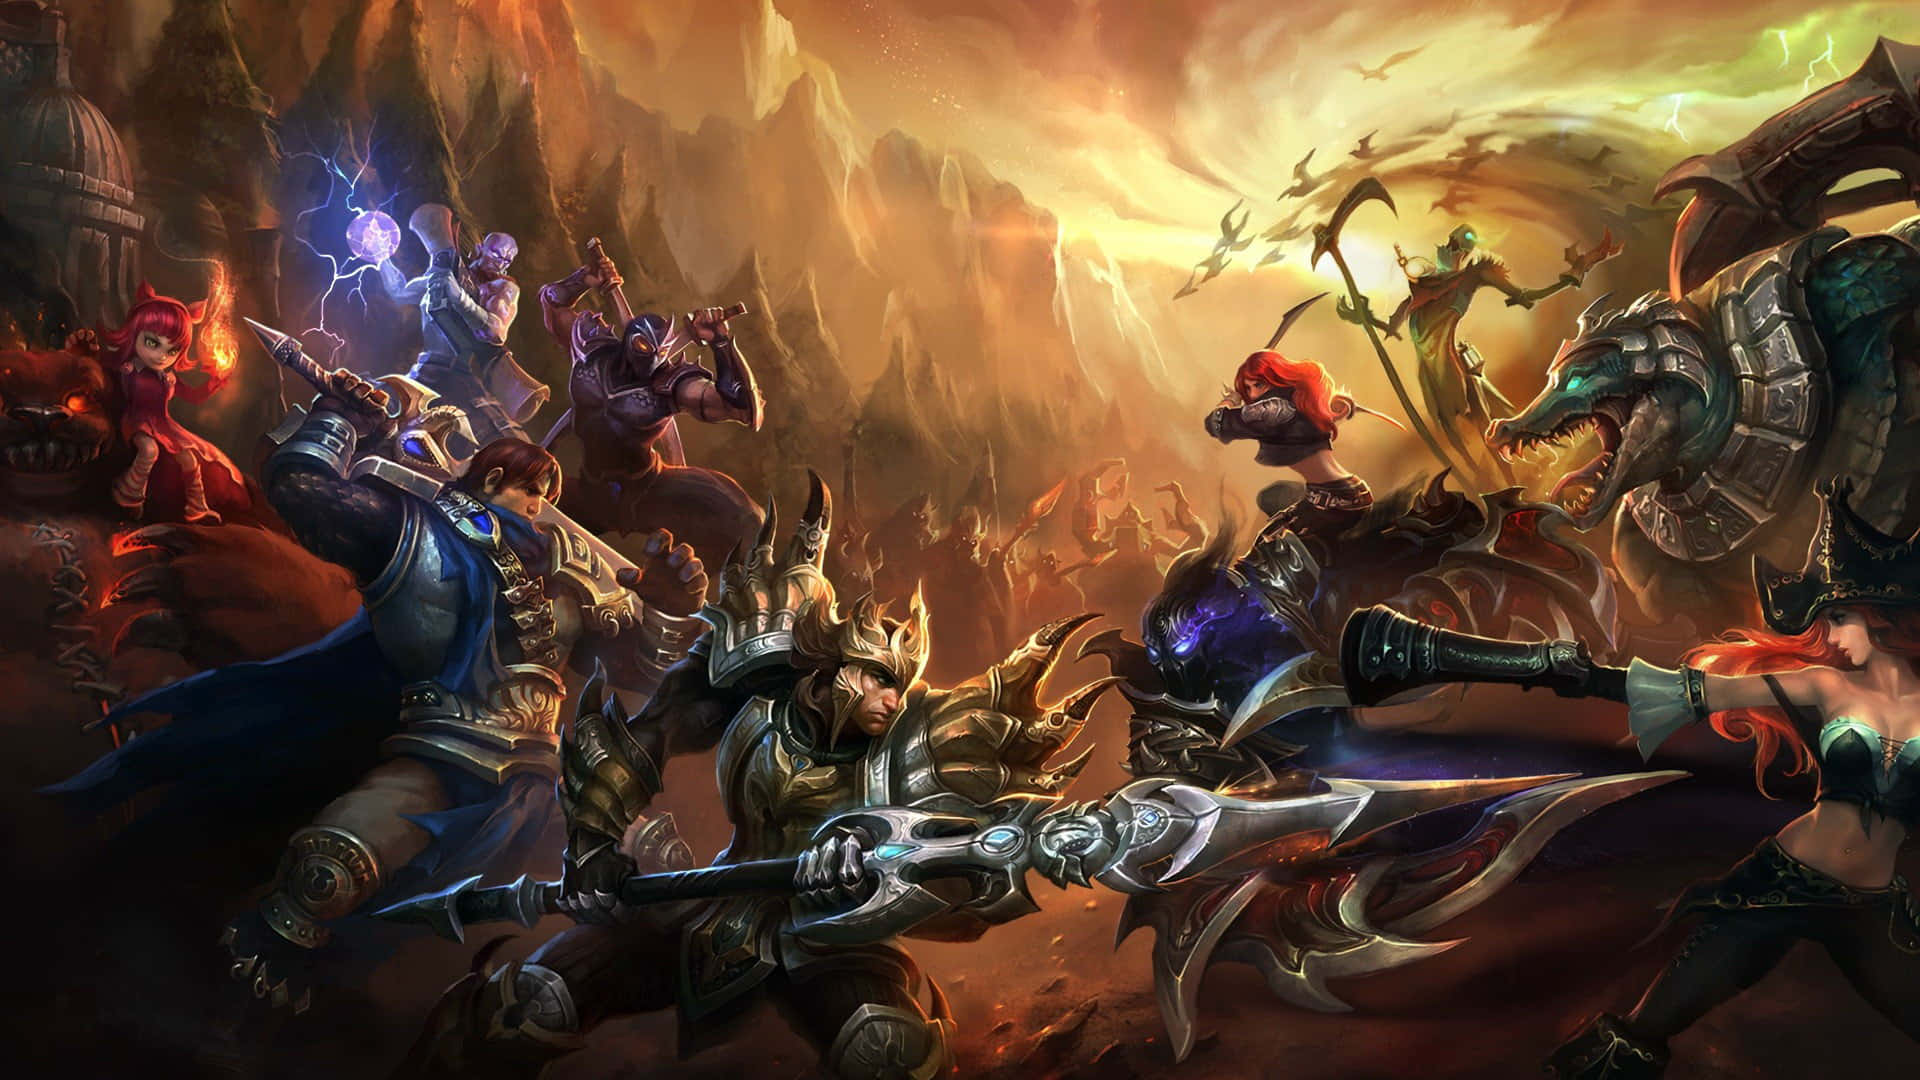 Outwit your opponents in the world of League of Legends